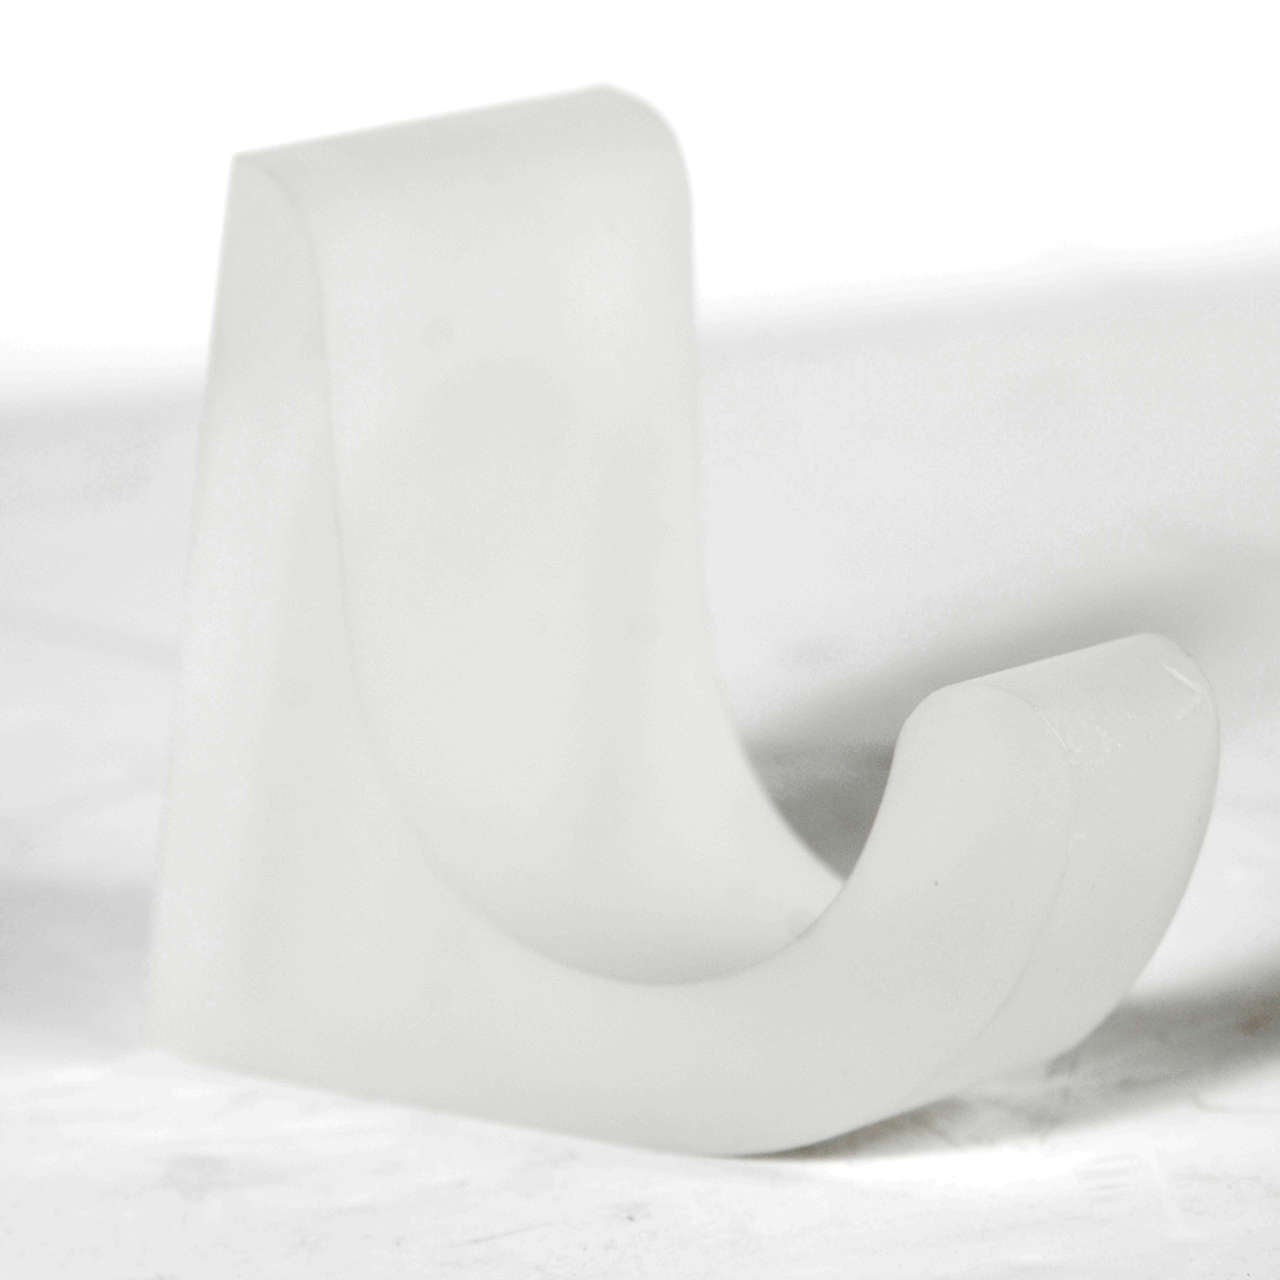 This vintage lucite robe hook features a semi-opaque finish resembling frosted glass and a simple muscular form is also incredibly dynamic with its wavelike undulating curve. This object eloquently showcases the aesthetic of 1970s modernist design,